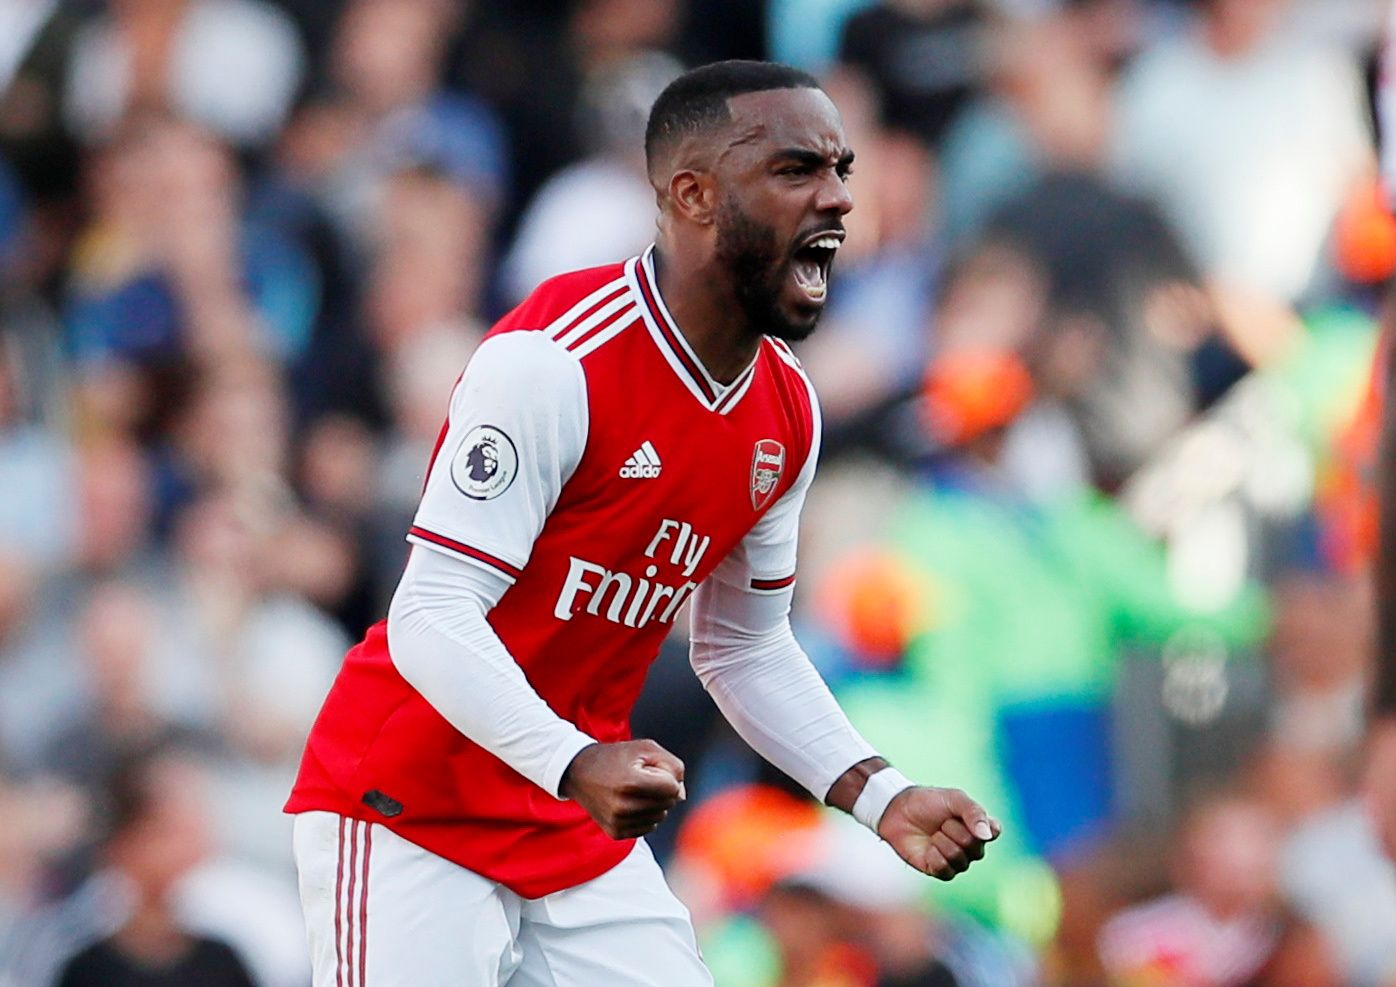 Soccer Football - Premier League - Arsenal v Tottenham Hotspur - Emirates Stadium, London, Britain - September 1, 2019  Arsenal's Alexandre Lacazette celebrates scoring their first goal   REUTERS/David Klein  EDITORIAL USE ONLY. No use with unauthorized audio, video, data, fixture lists, club/league logos or 